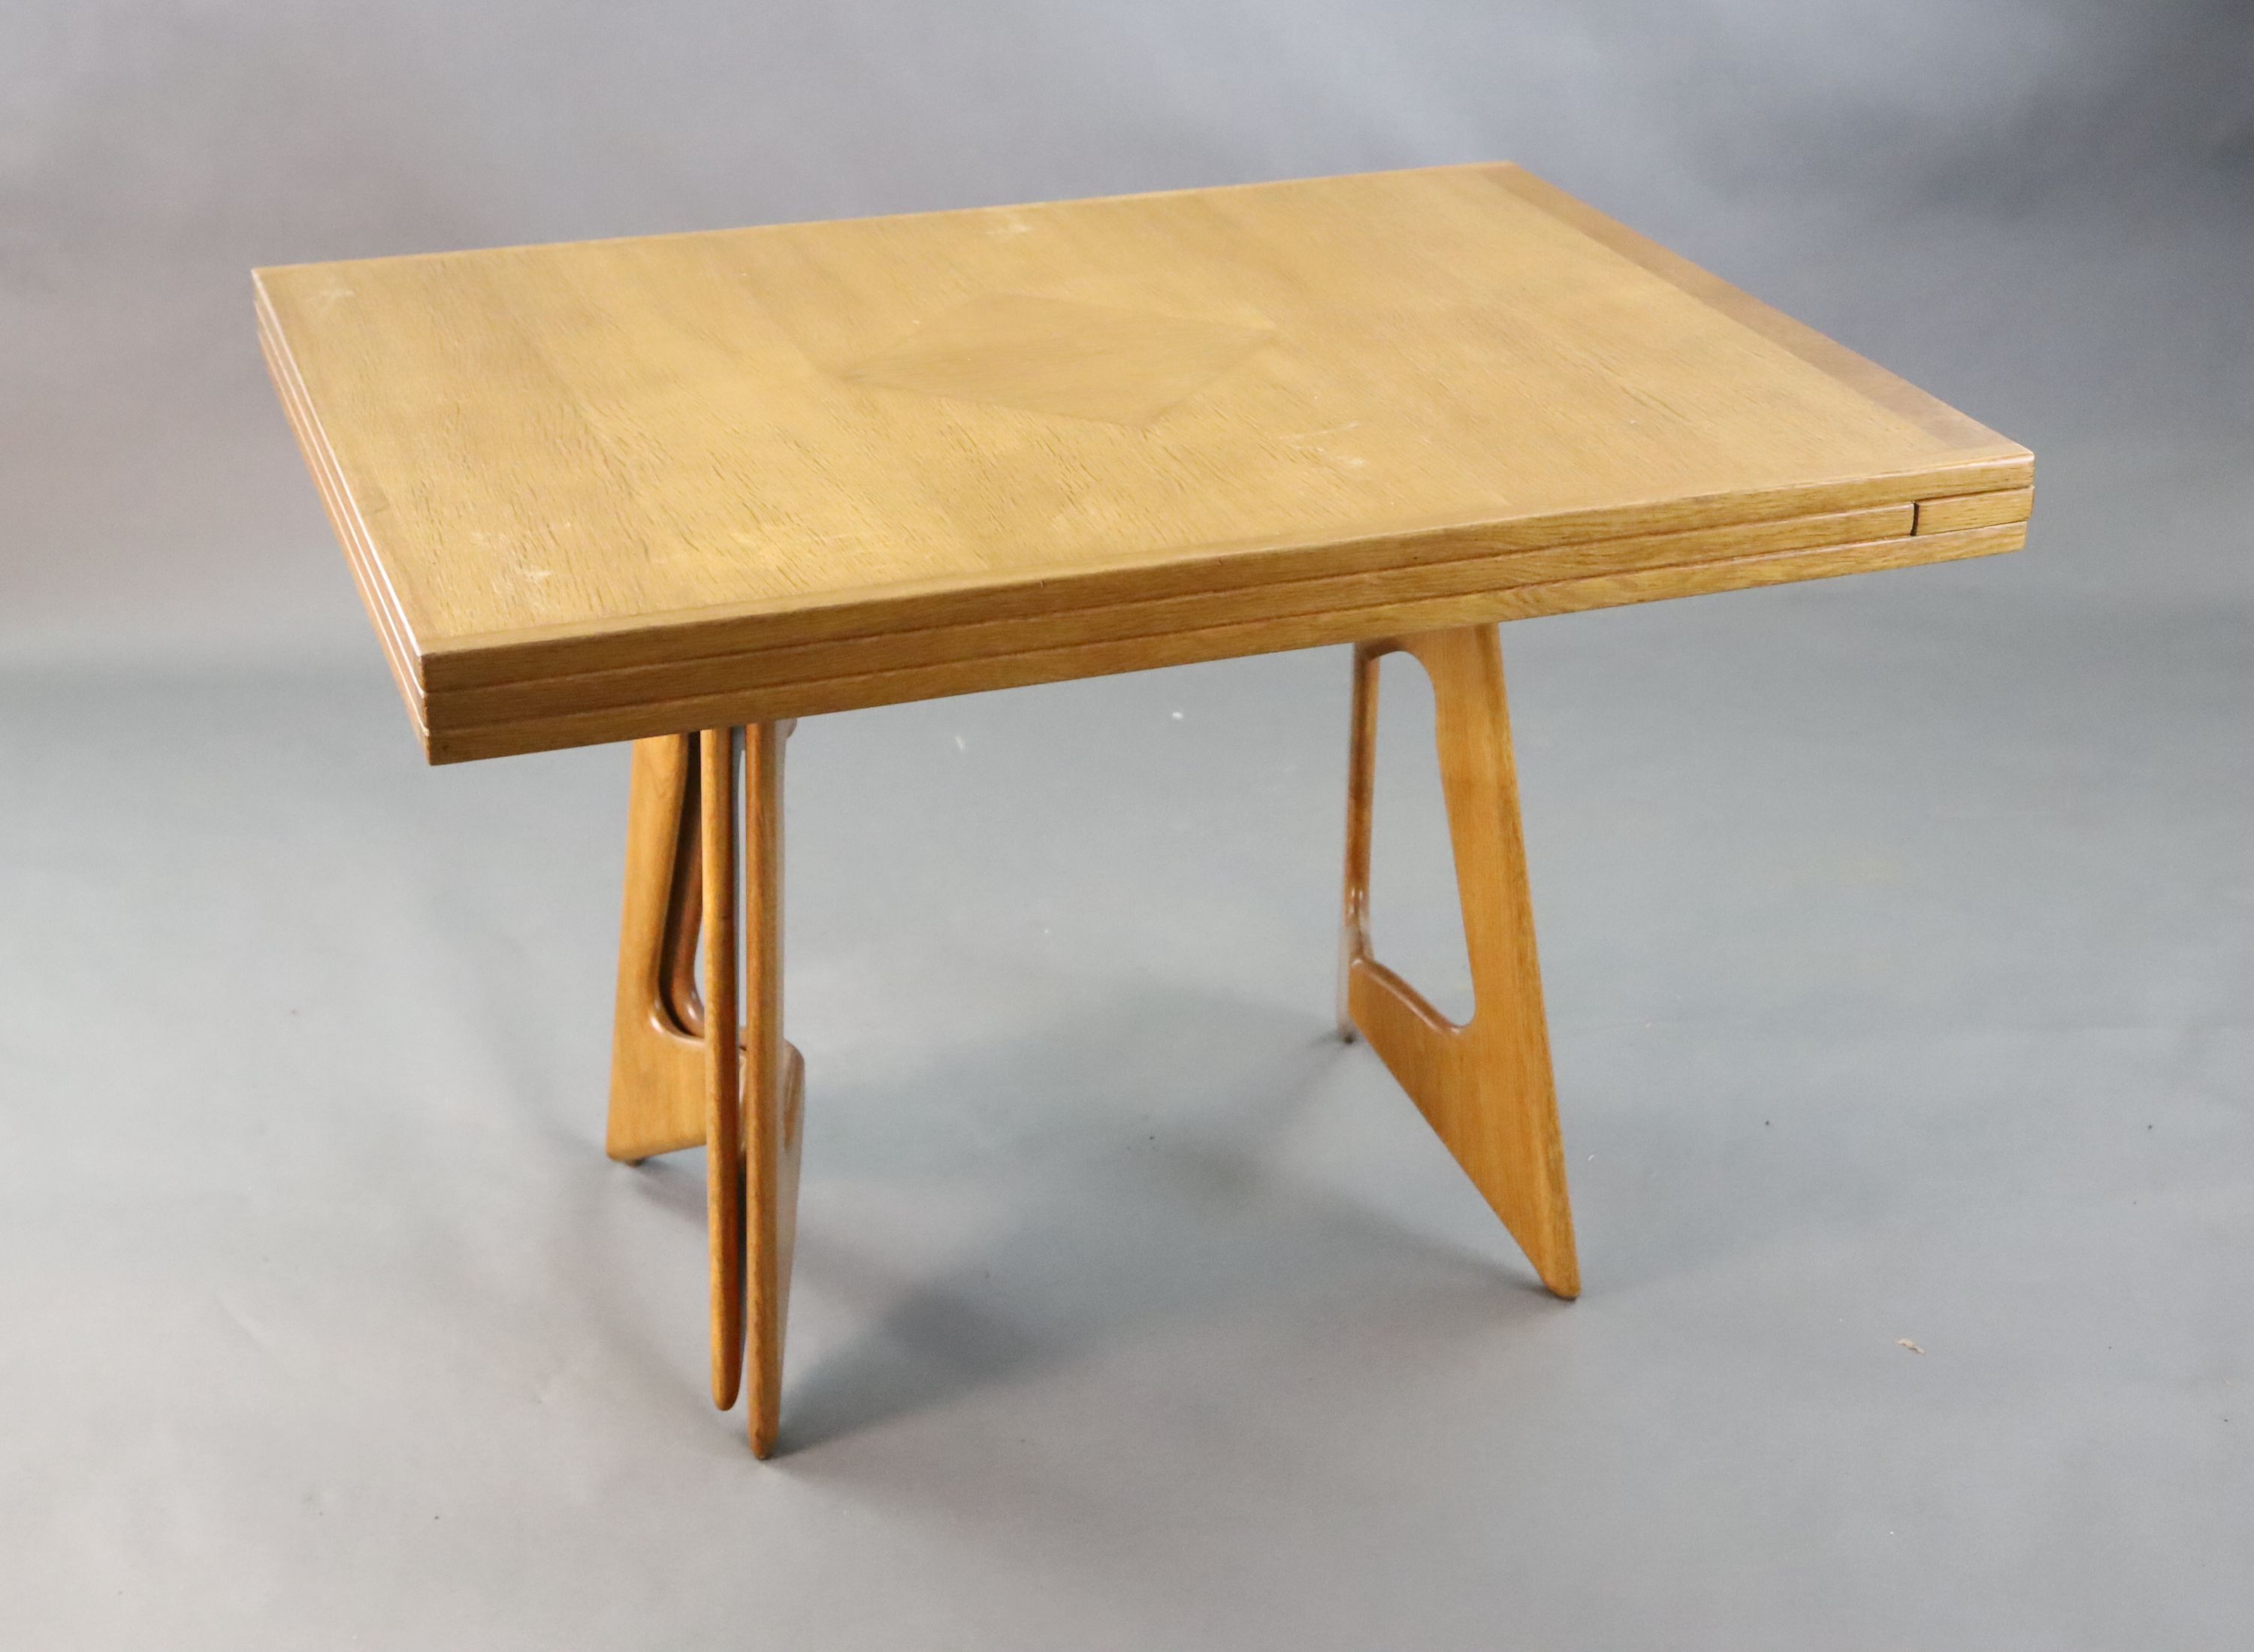 A Guillerme & Chambron golden oak draw leaf dining table, W.3ft 7in. D.2ft 9in. when closed, H.2ft 5in.